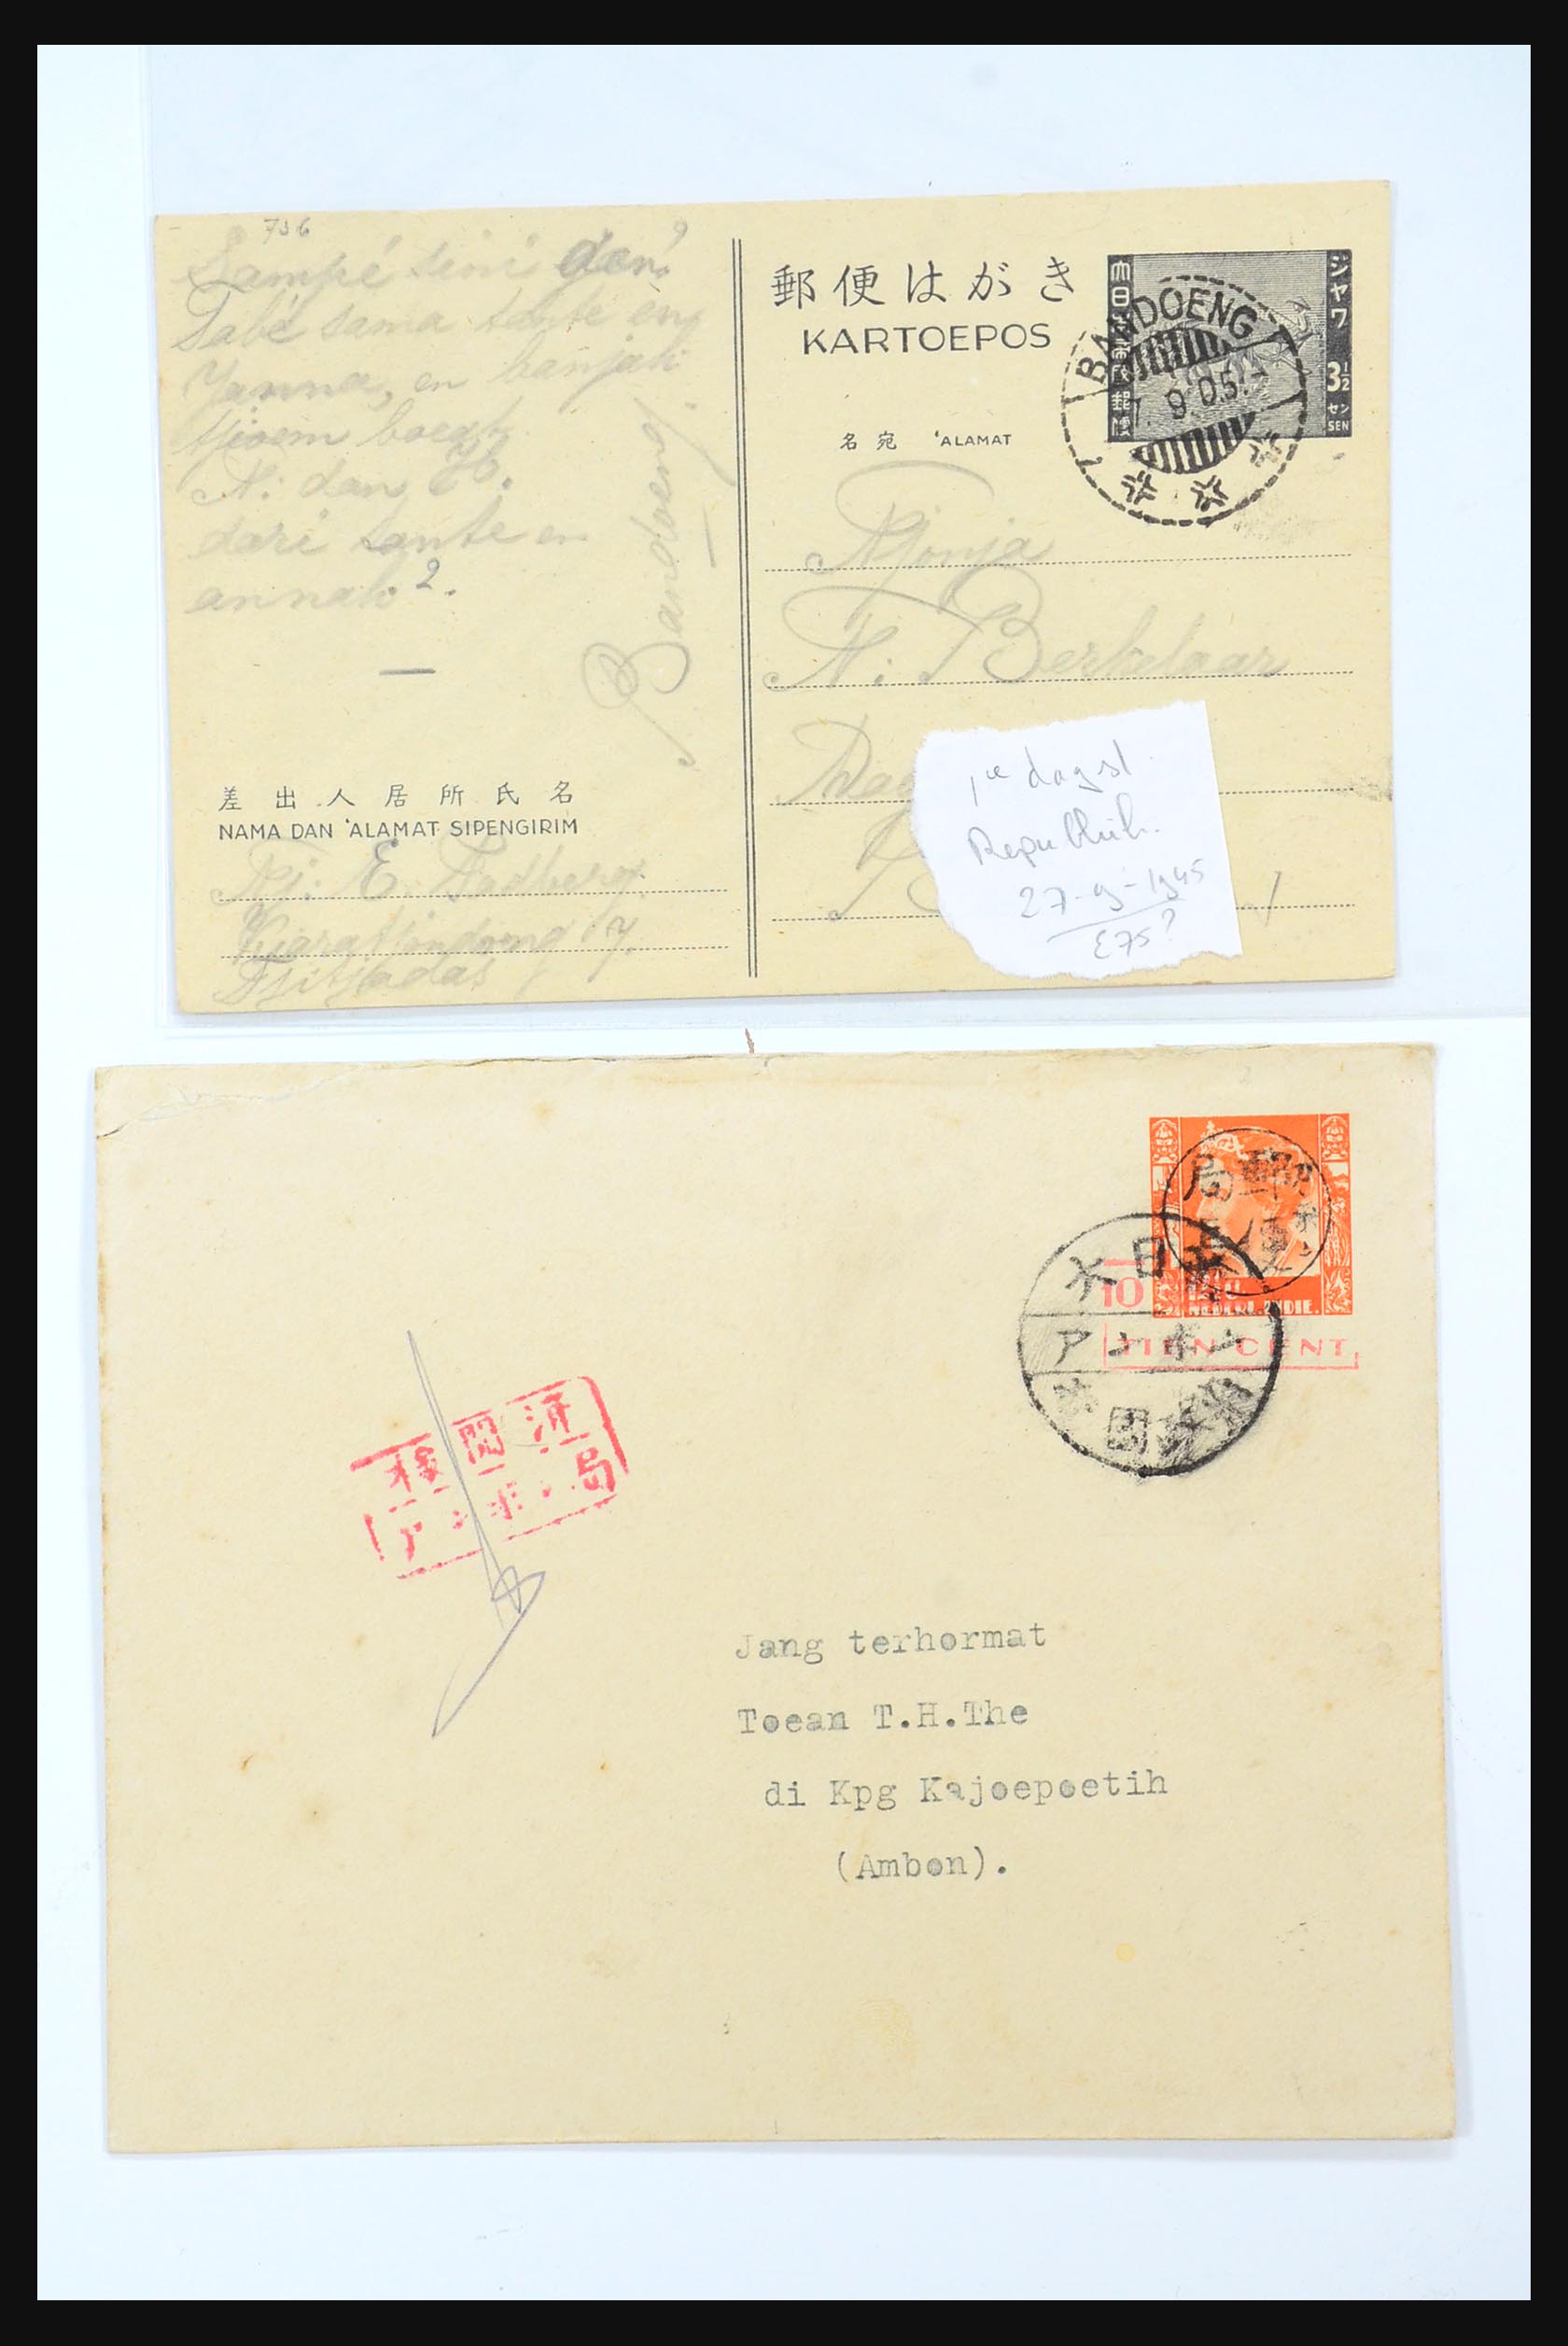 31362 123 - 31362 Netherlands Indies Japanese occupation covers 1942-1945.